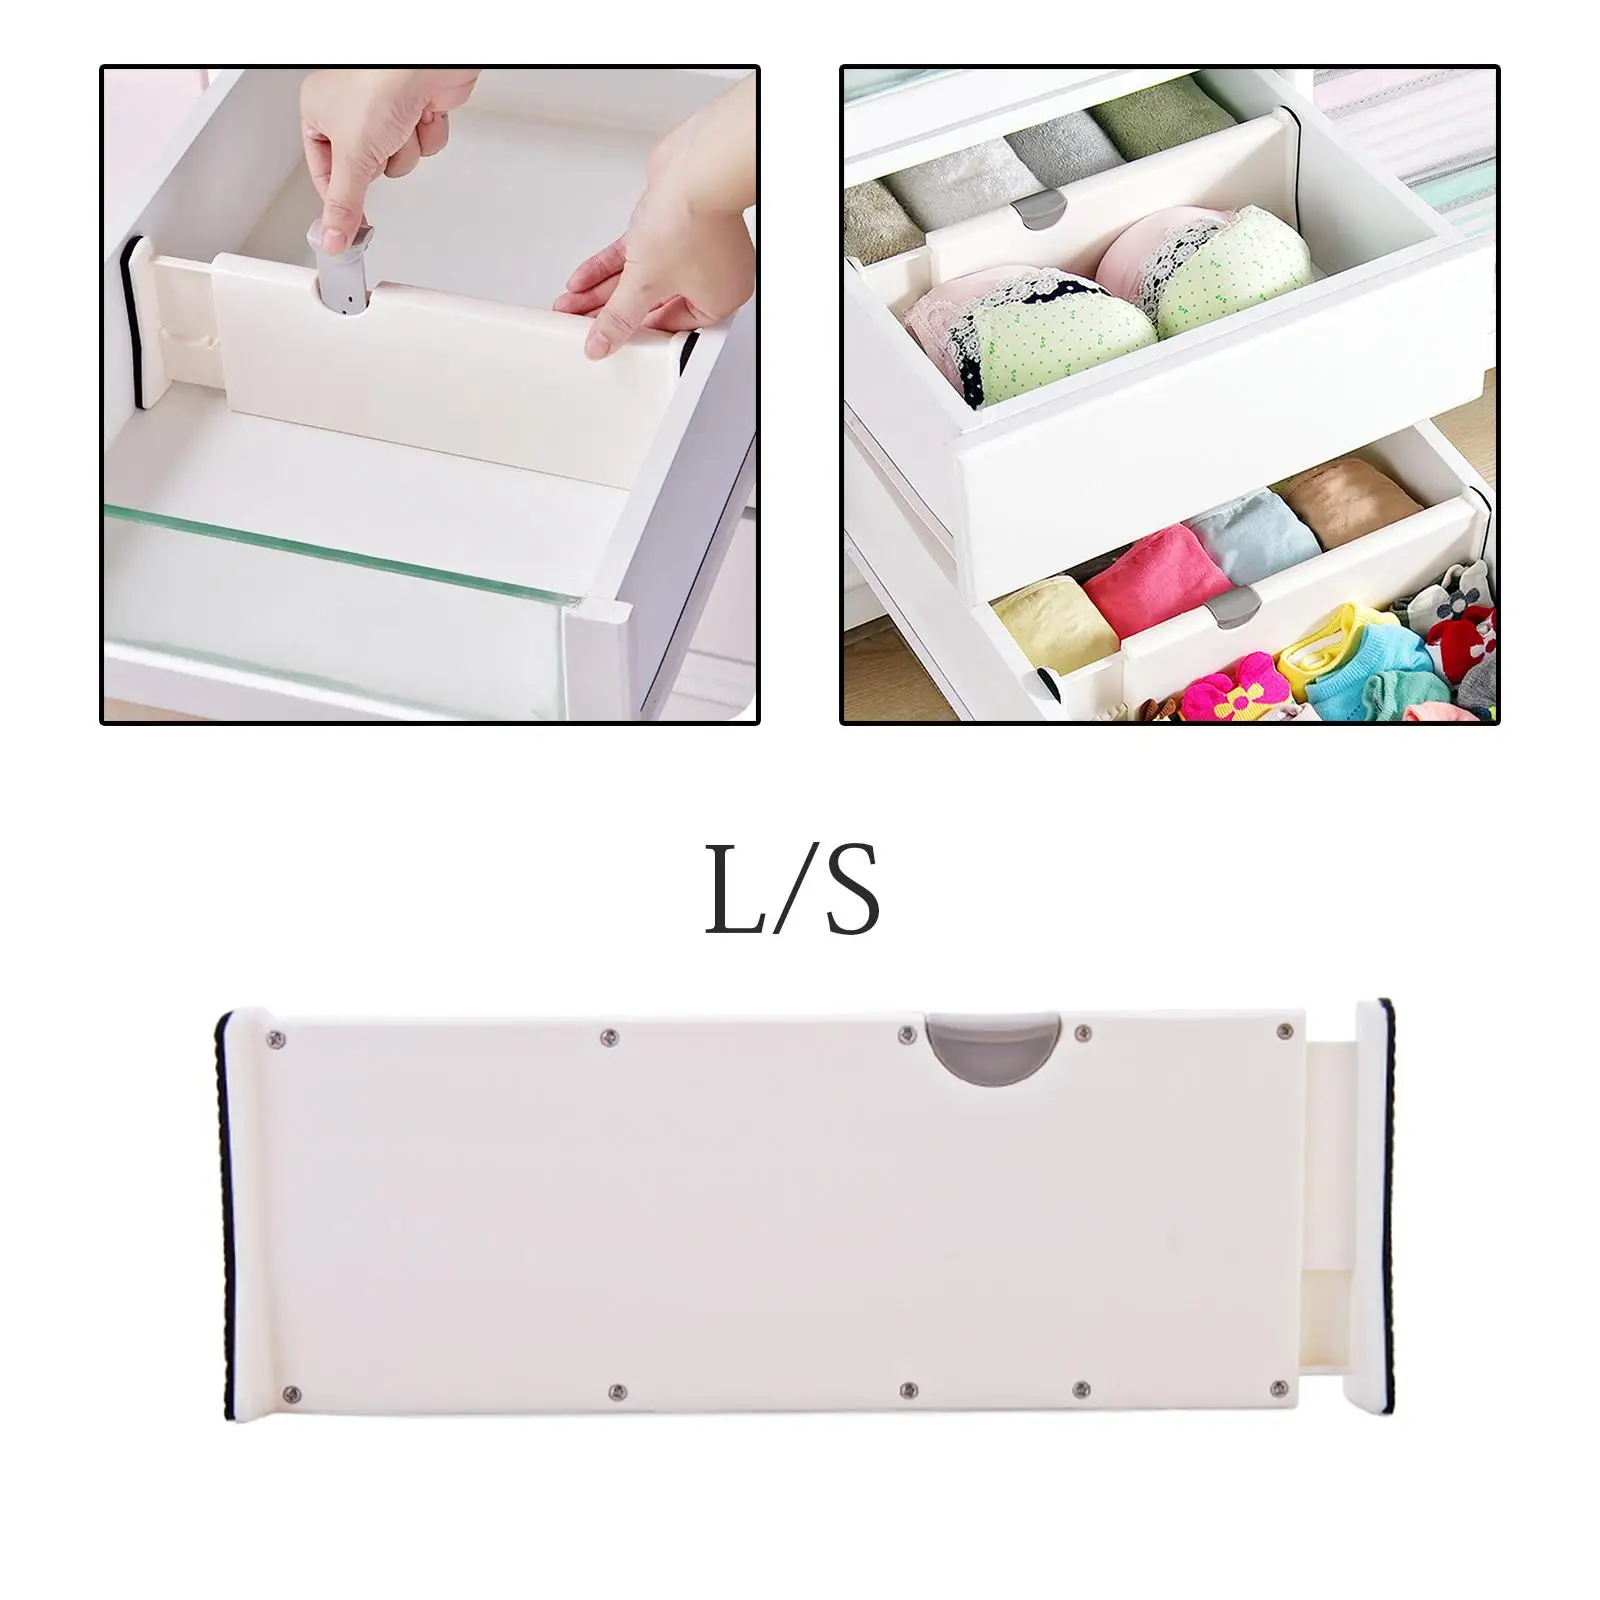 Storage Drawers Divider Retractable Household Tools ABS Plastic Dresser Organizer for Bedroom Cabinet Clothing Desk Teen Adults